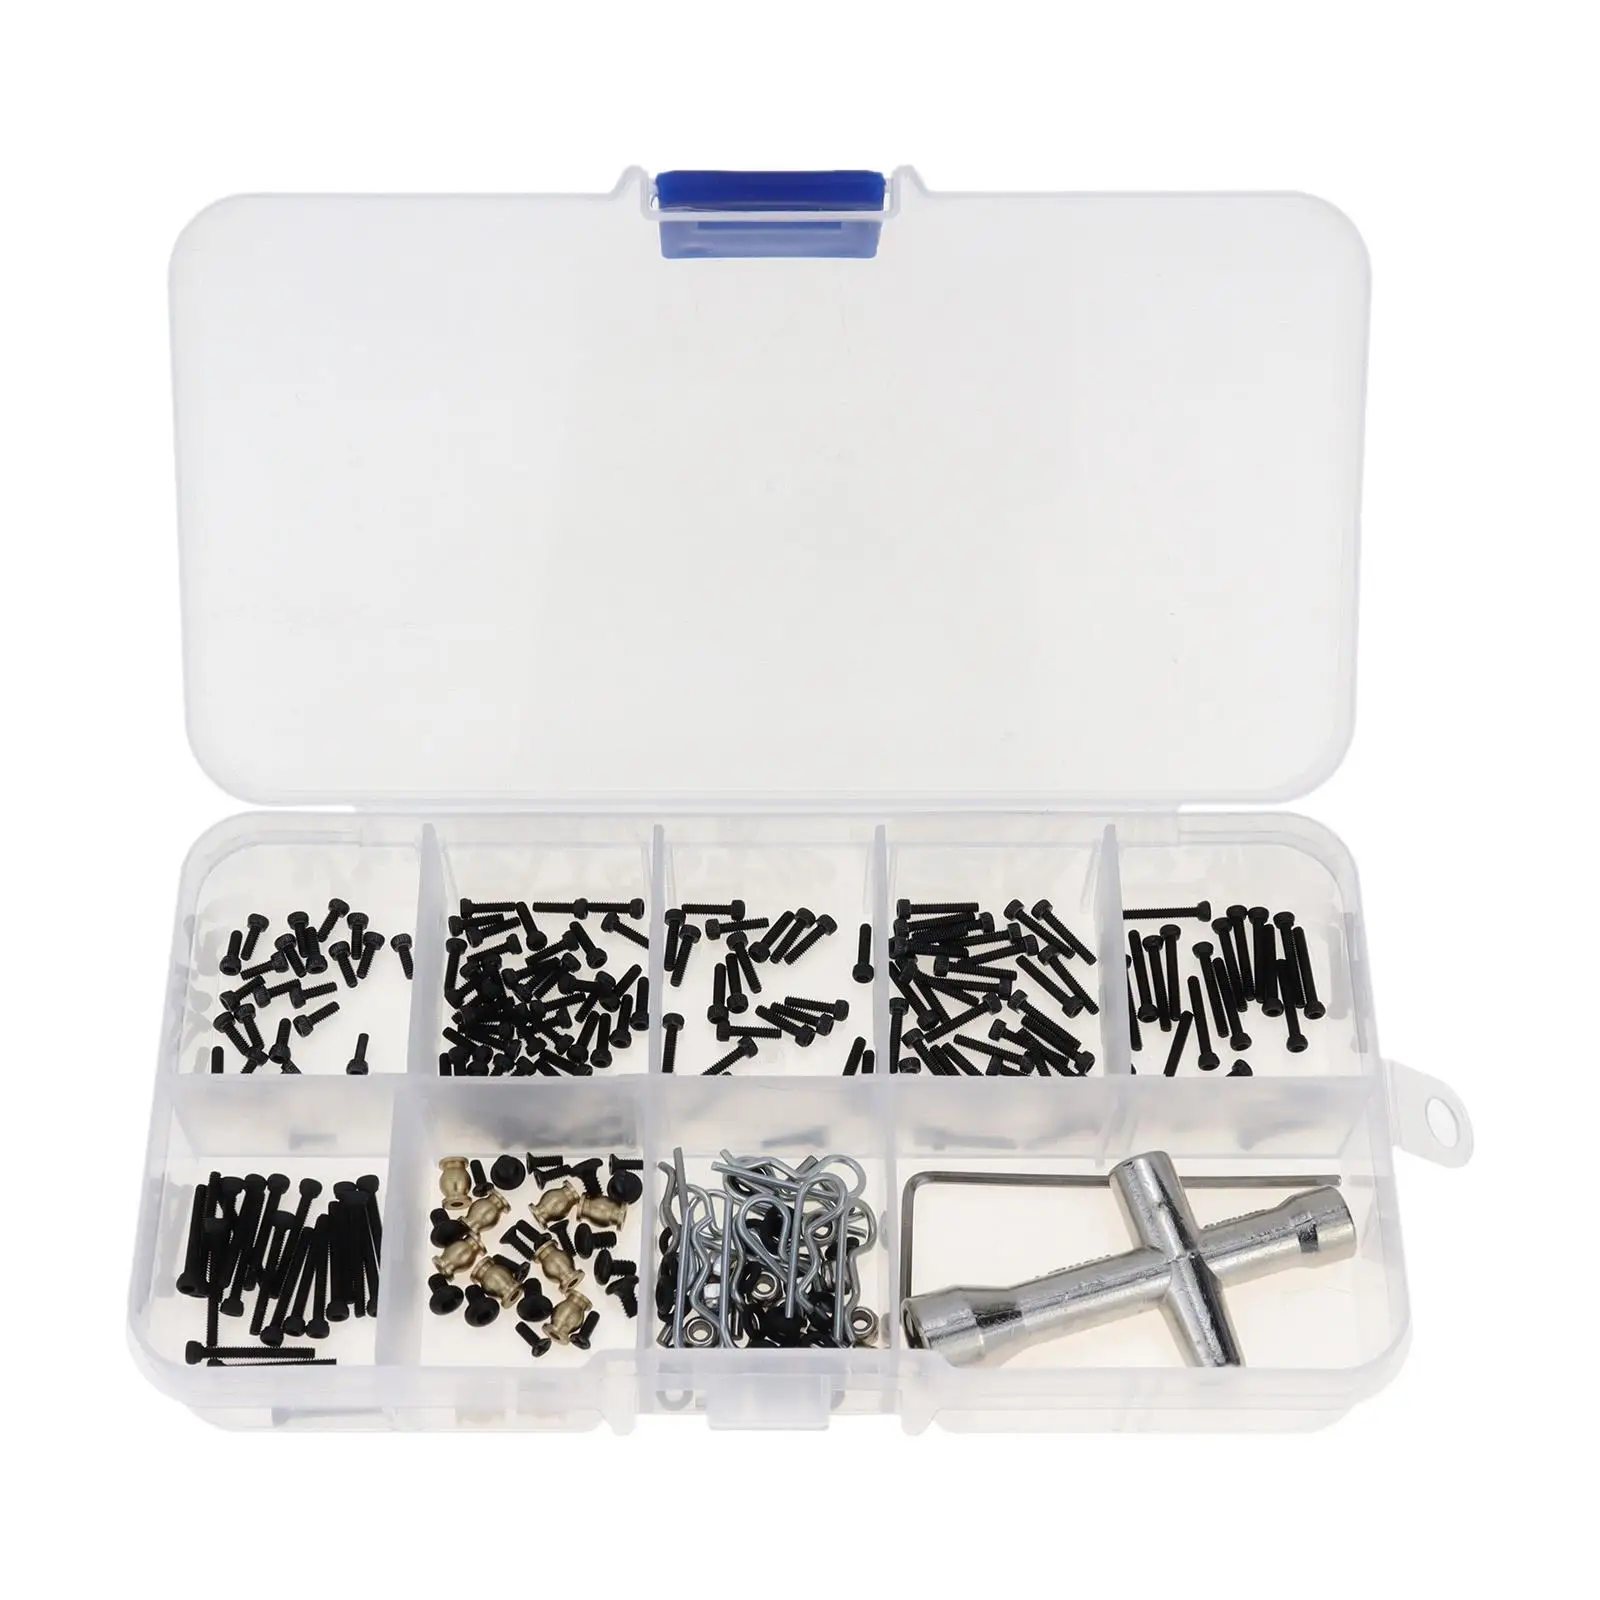 252 Pieces M1.4 Screws Kit Replacements for Axial SCX24 Axi00006 Trucks